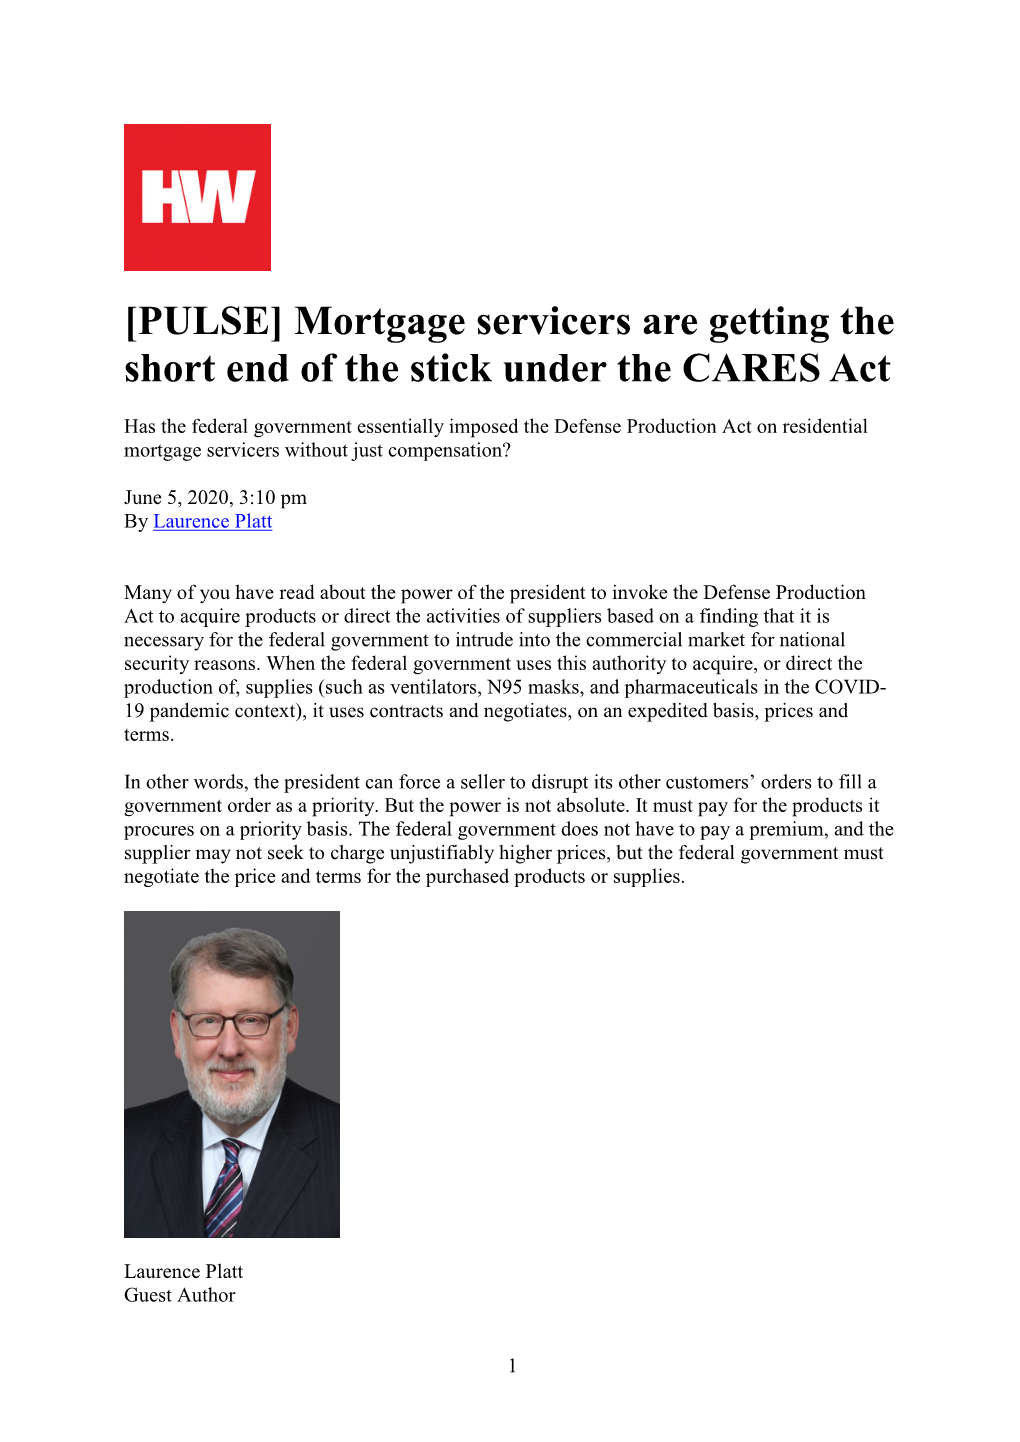 Mortgage Servicers Are Getting the Short End of the Stick Under the CARES Act